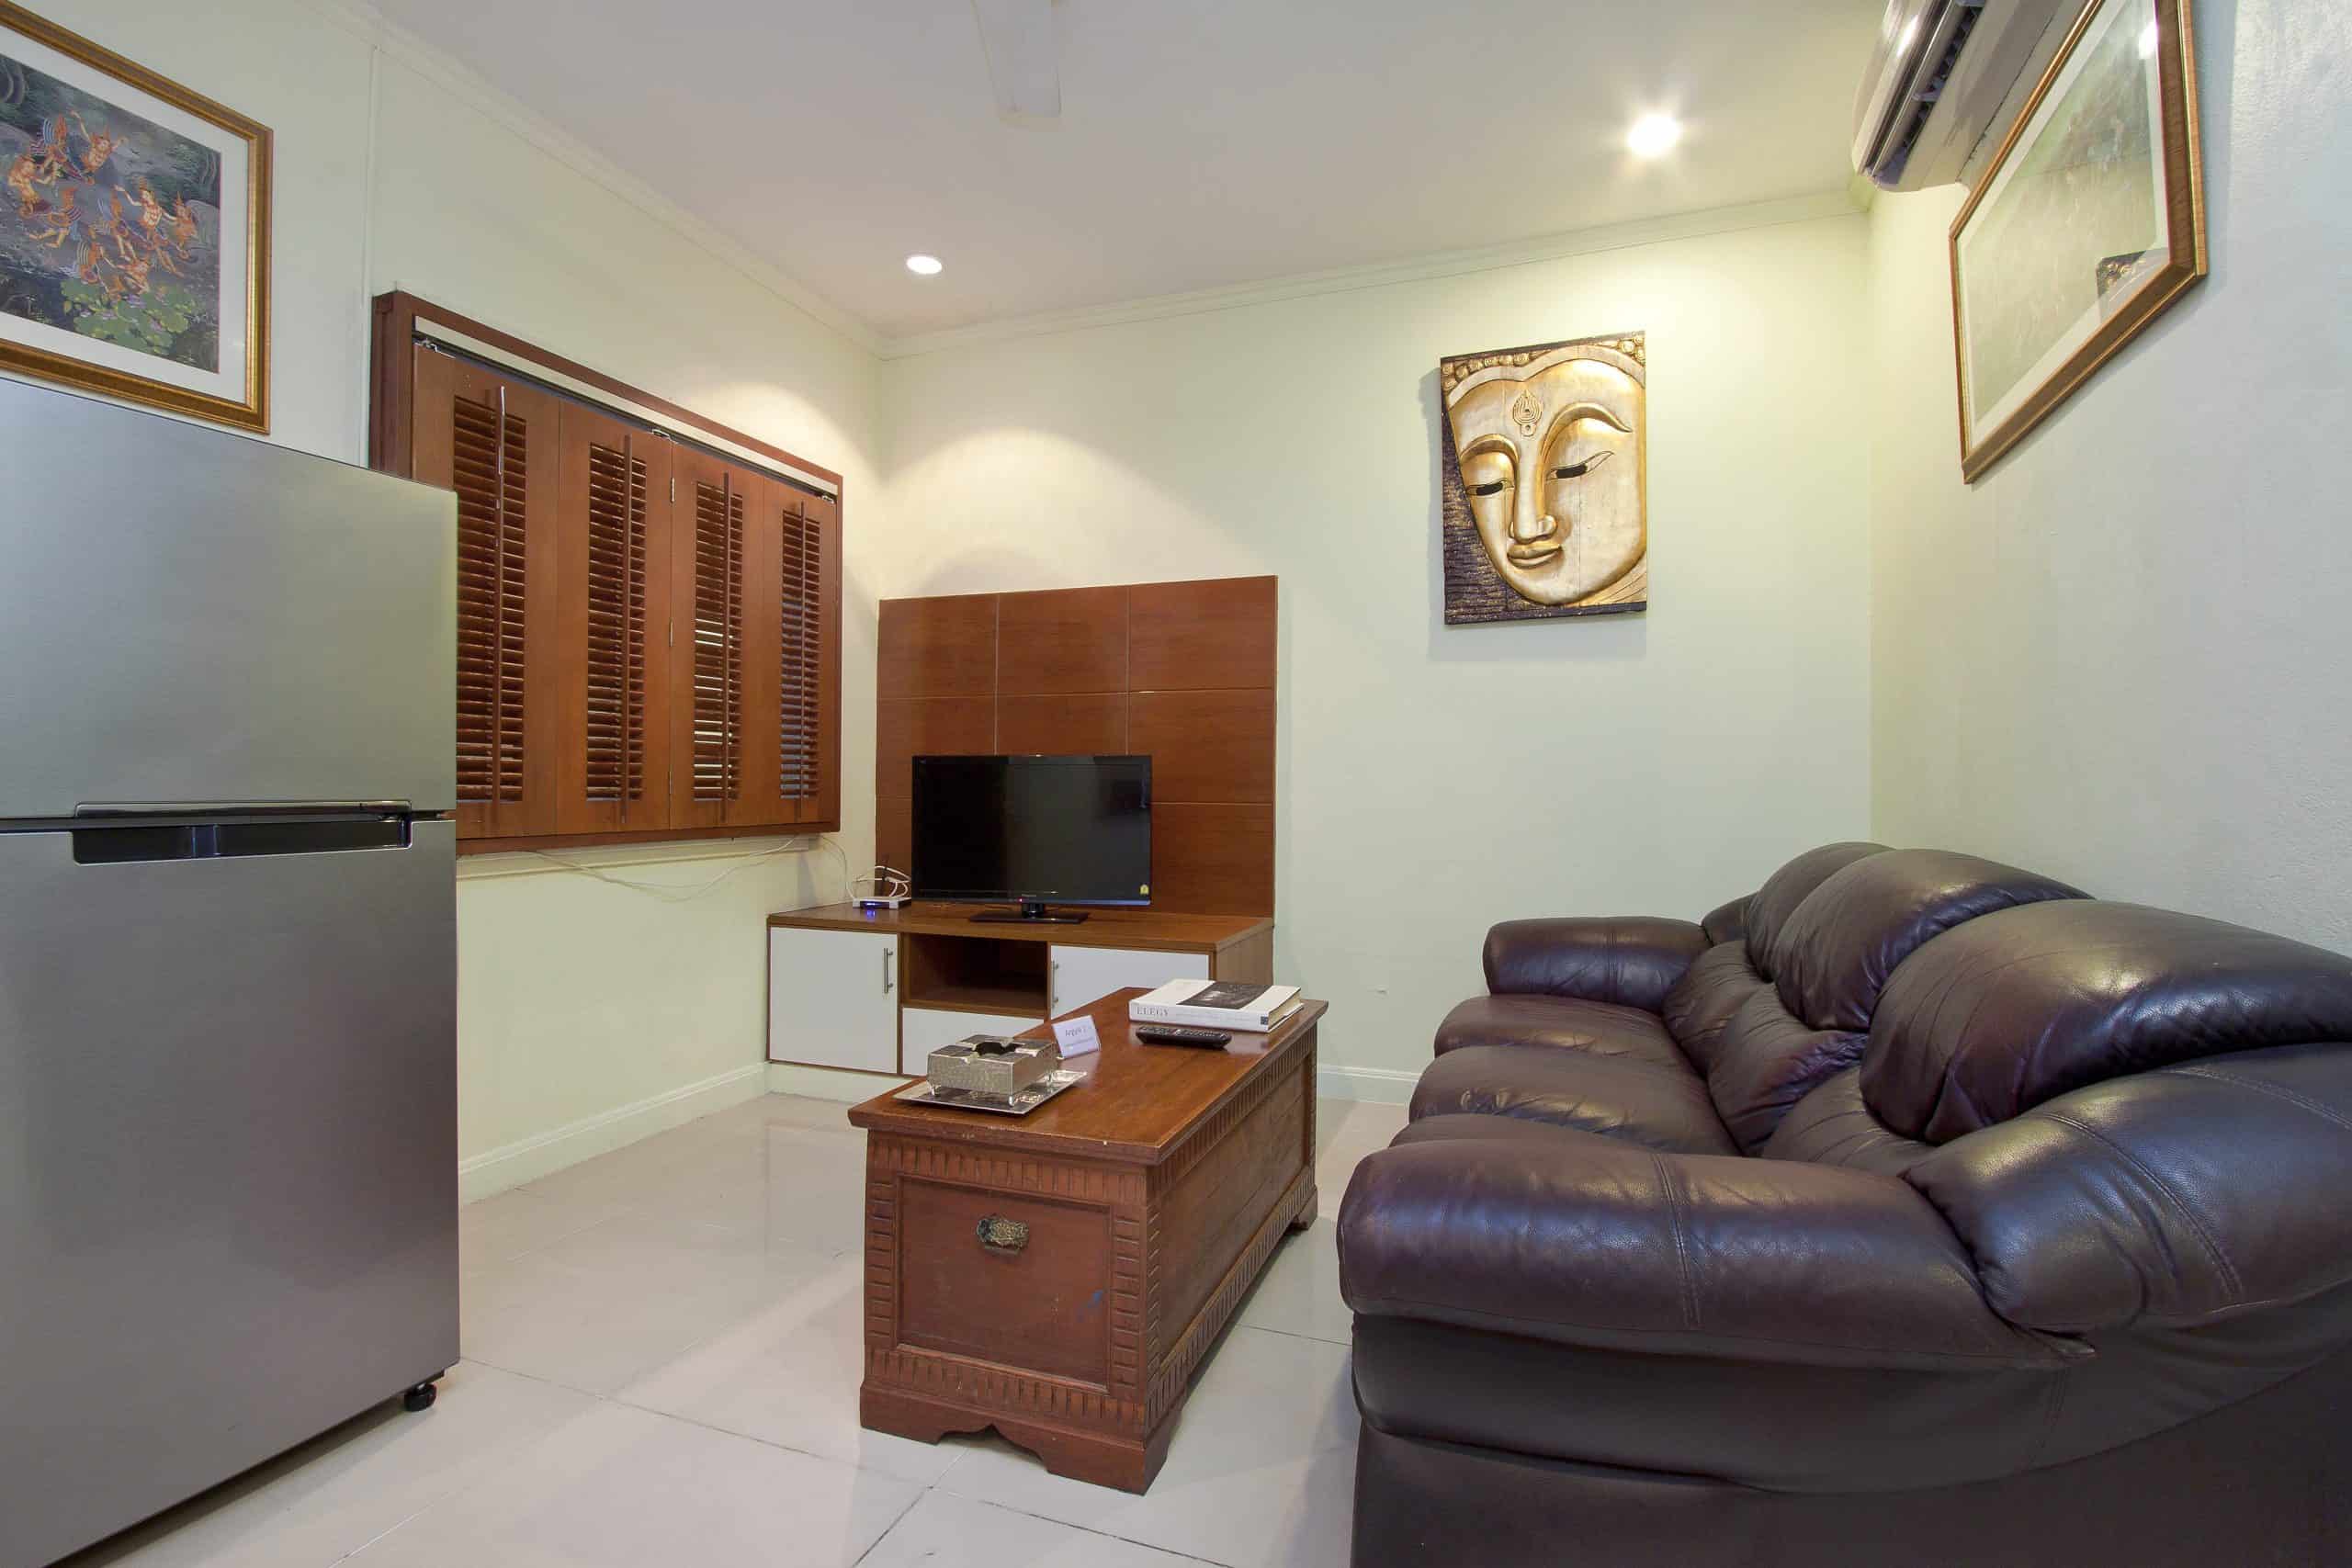 Explore Pattaya from the comfort of your own stylish studio apartment, complete with a cozy bed, functional kitchenette, private shower, air conditioning, and Wi-Fi